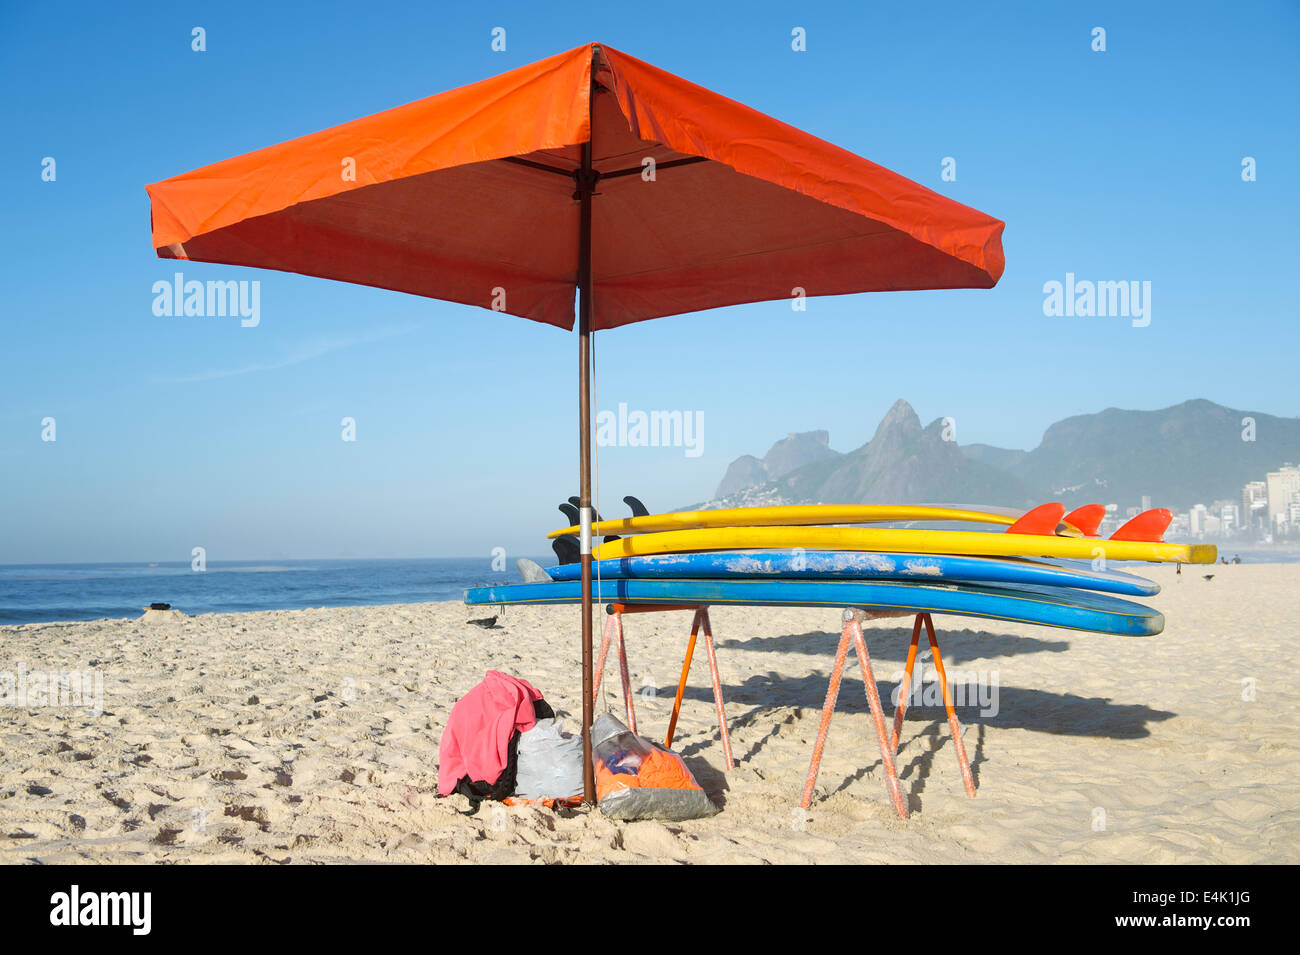 Colorful stand up paddle long board surfboards stacked next to beach umbrella on Ipanema Beach Rio de Janeiro Stock Photo